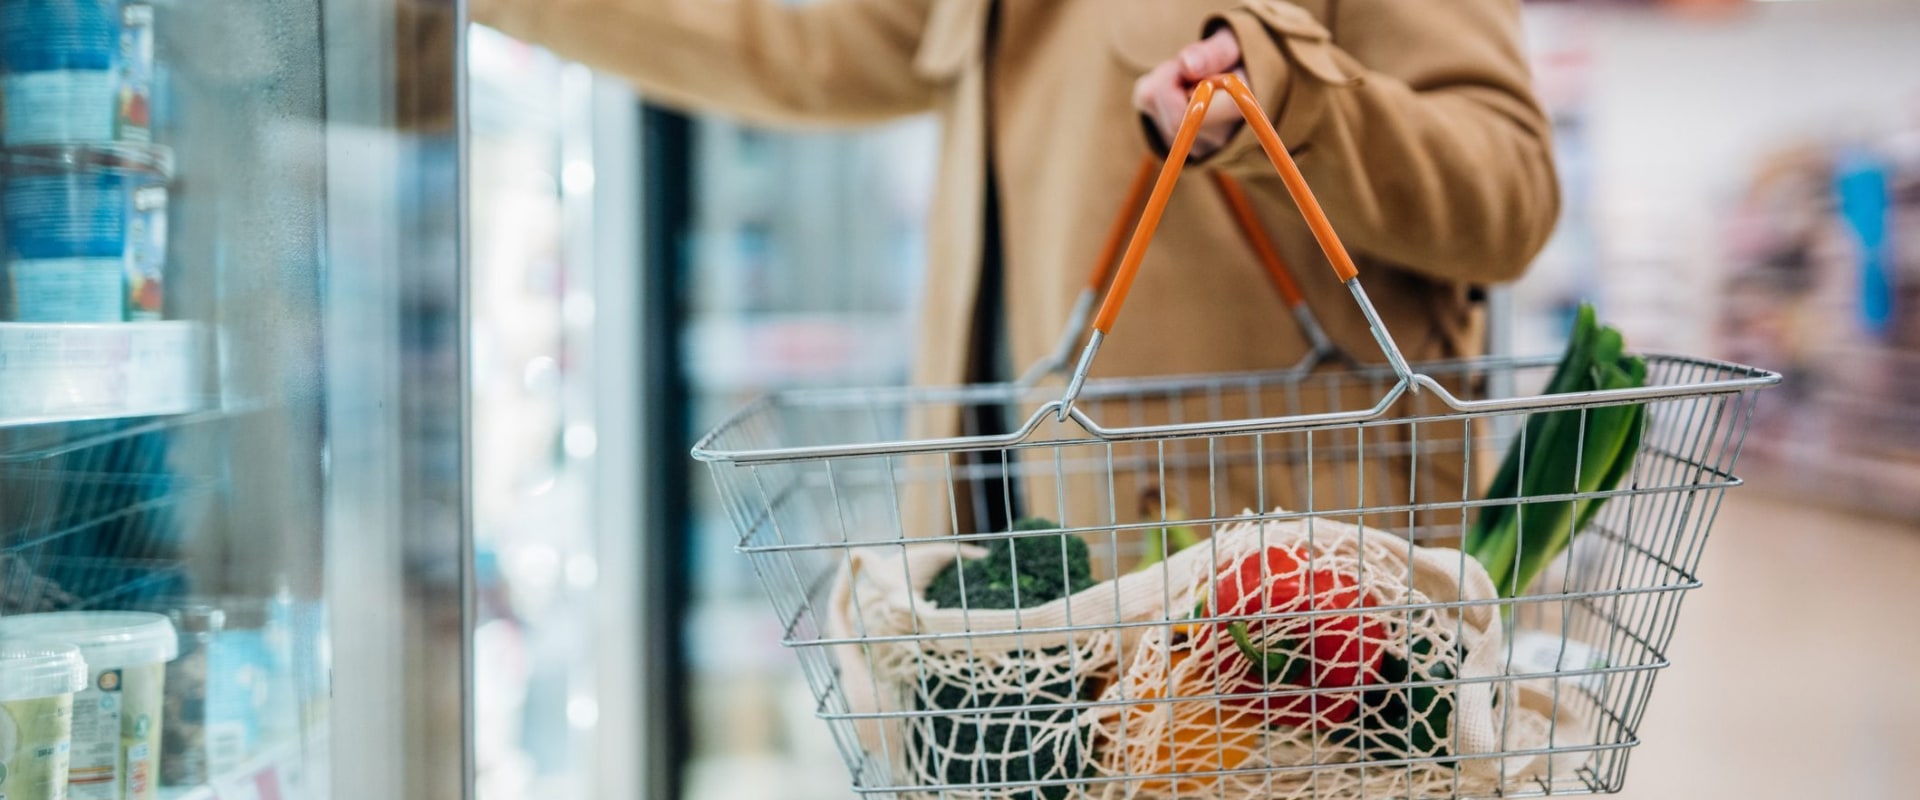 What to consider when grocery shopping?